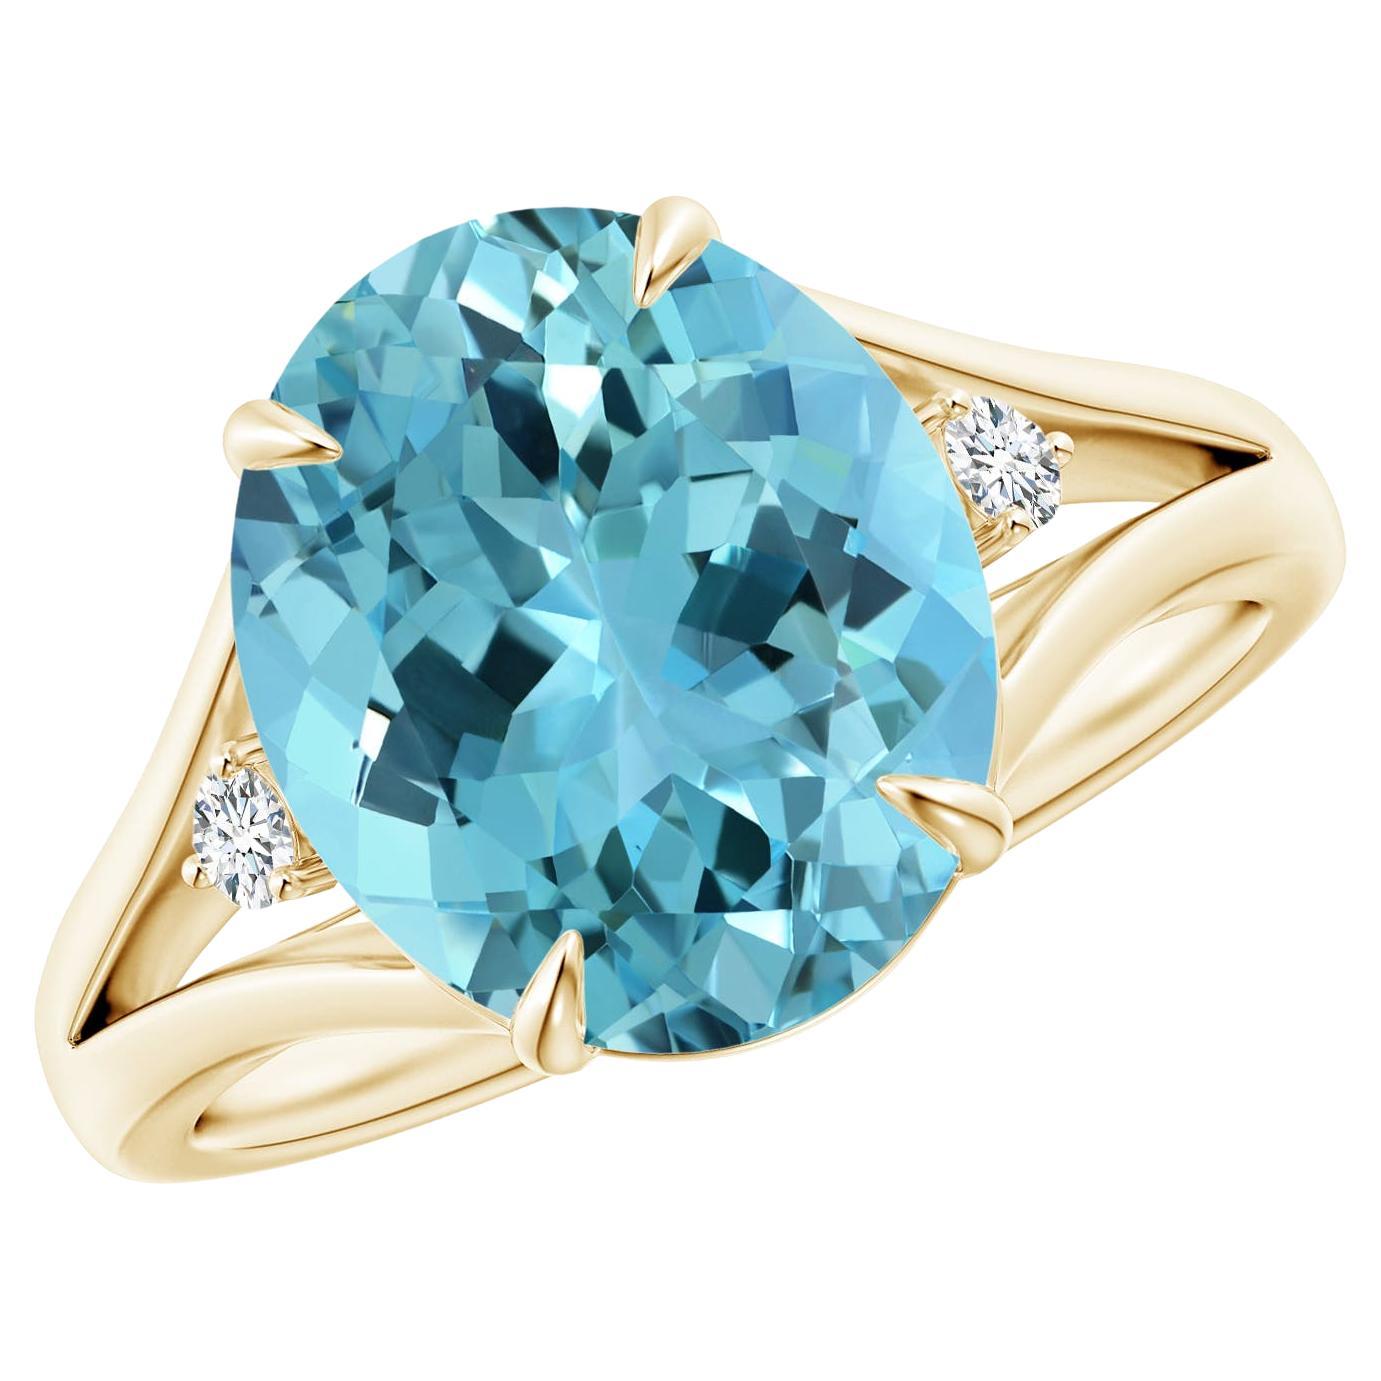 For Sale:  Angara Gia Certified Natural Aquamarine Ring in Yellow Gold with Diamond Accents